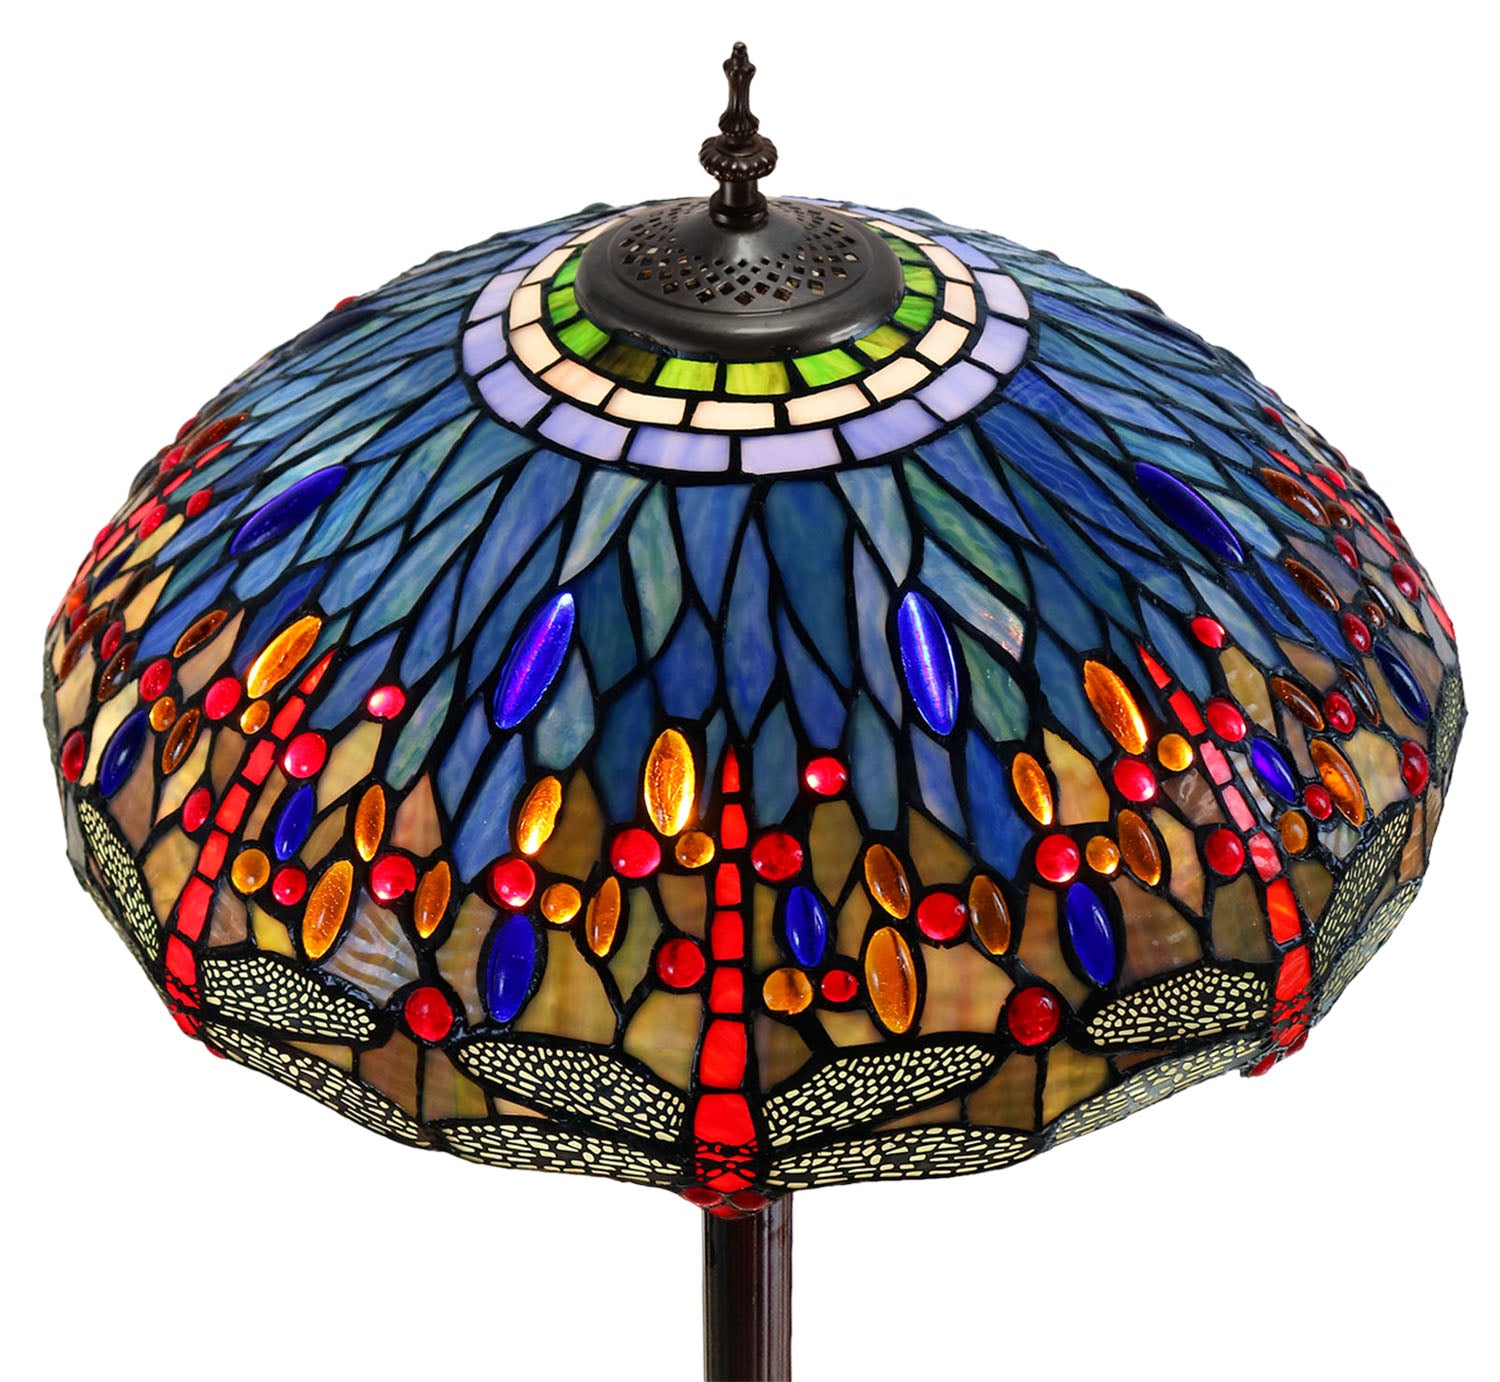 18" Classical Red Blue Dragonfly  Stained Glass Tiffany Floor Lamp